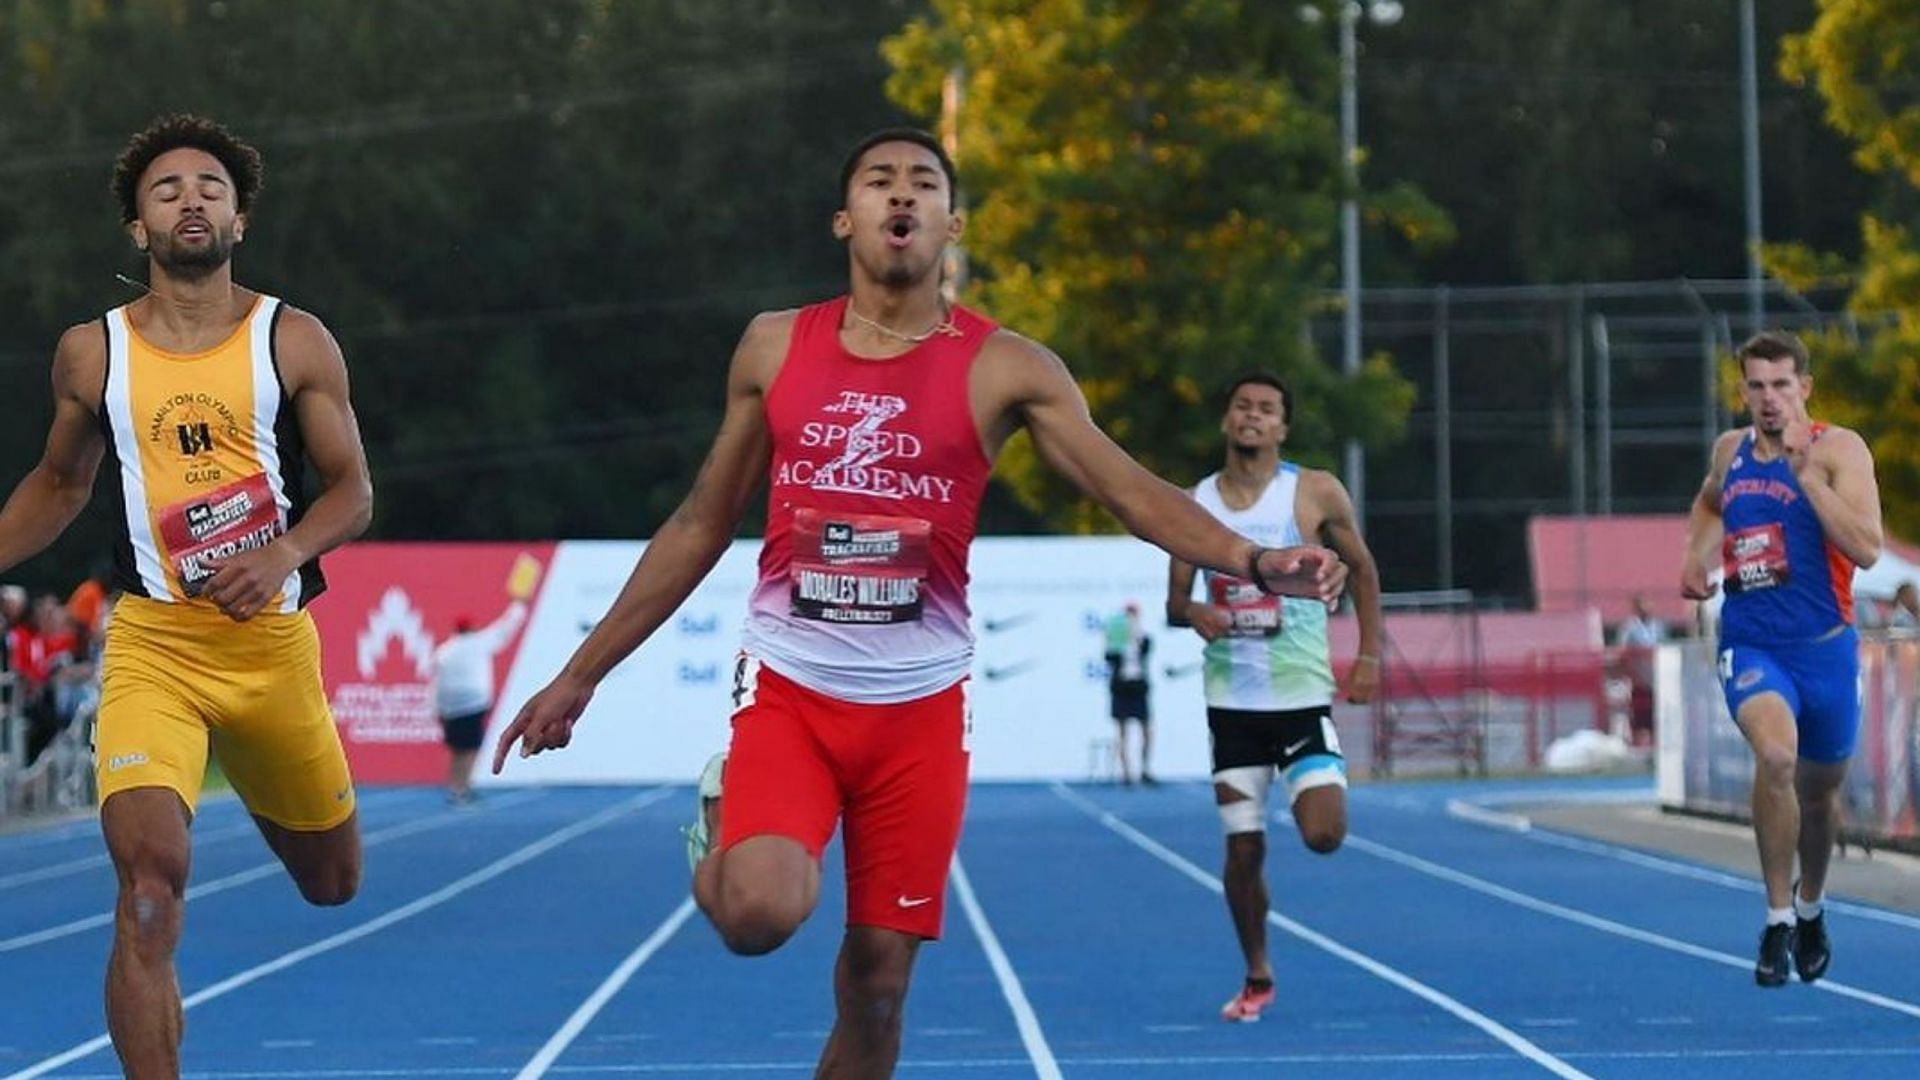 Christopher Morales Williams shattered the indoor 400m world record.